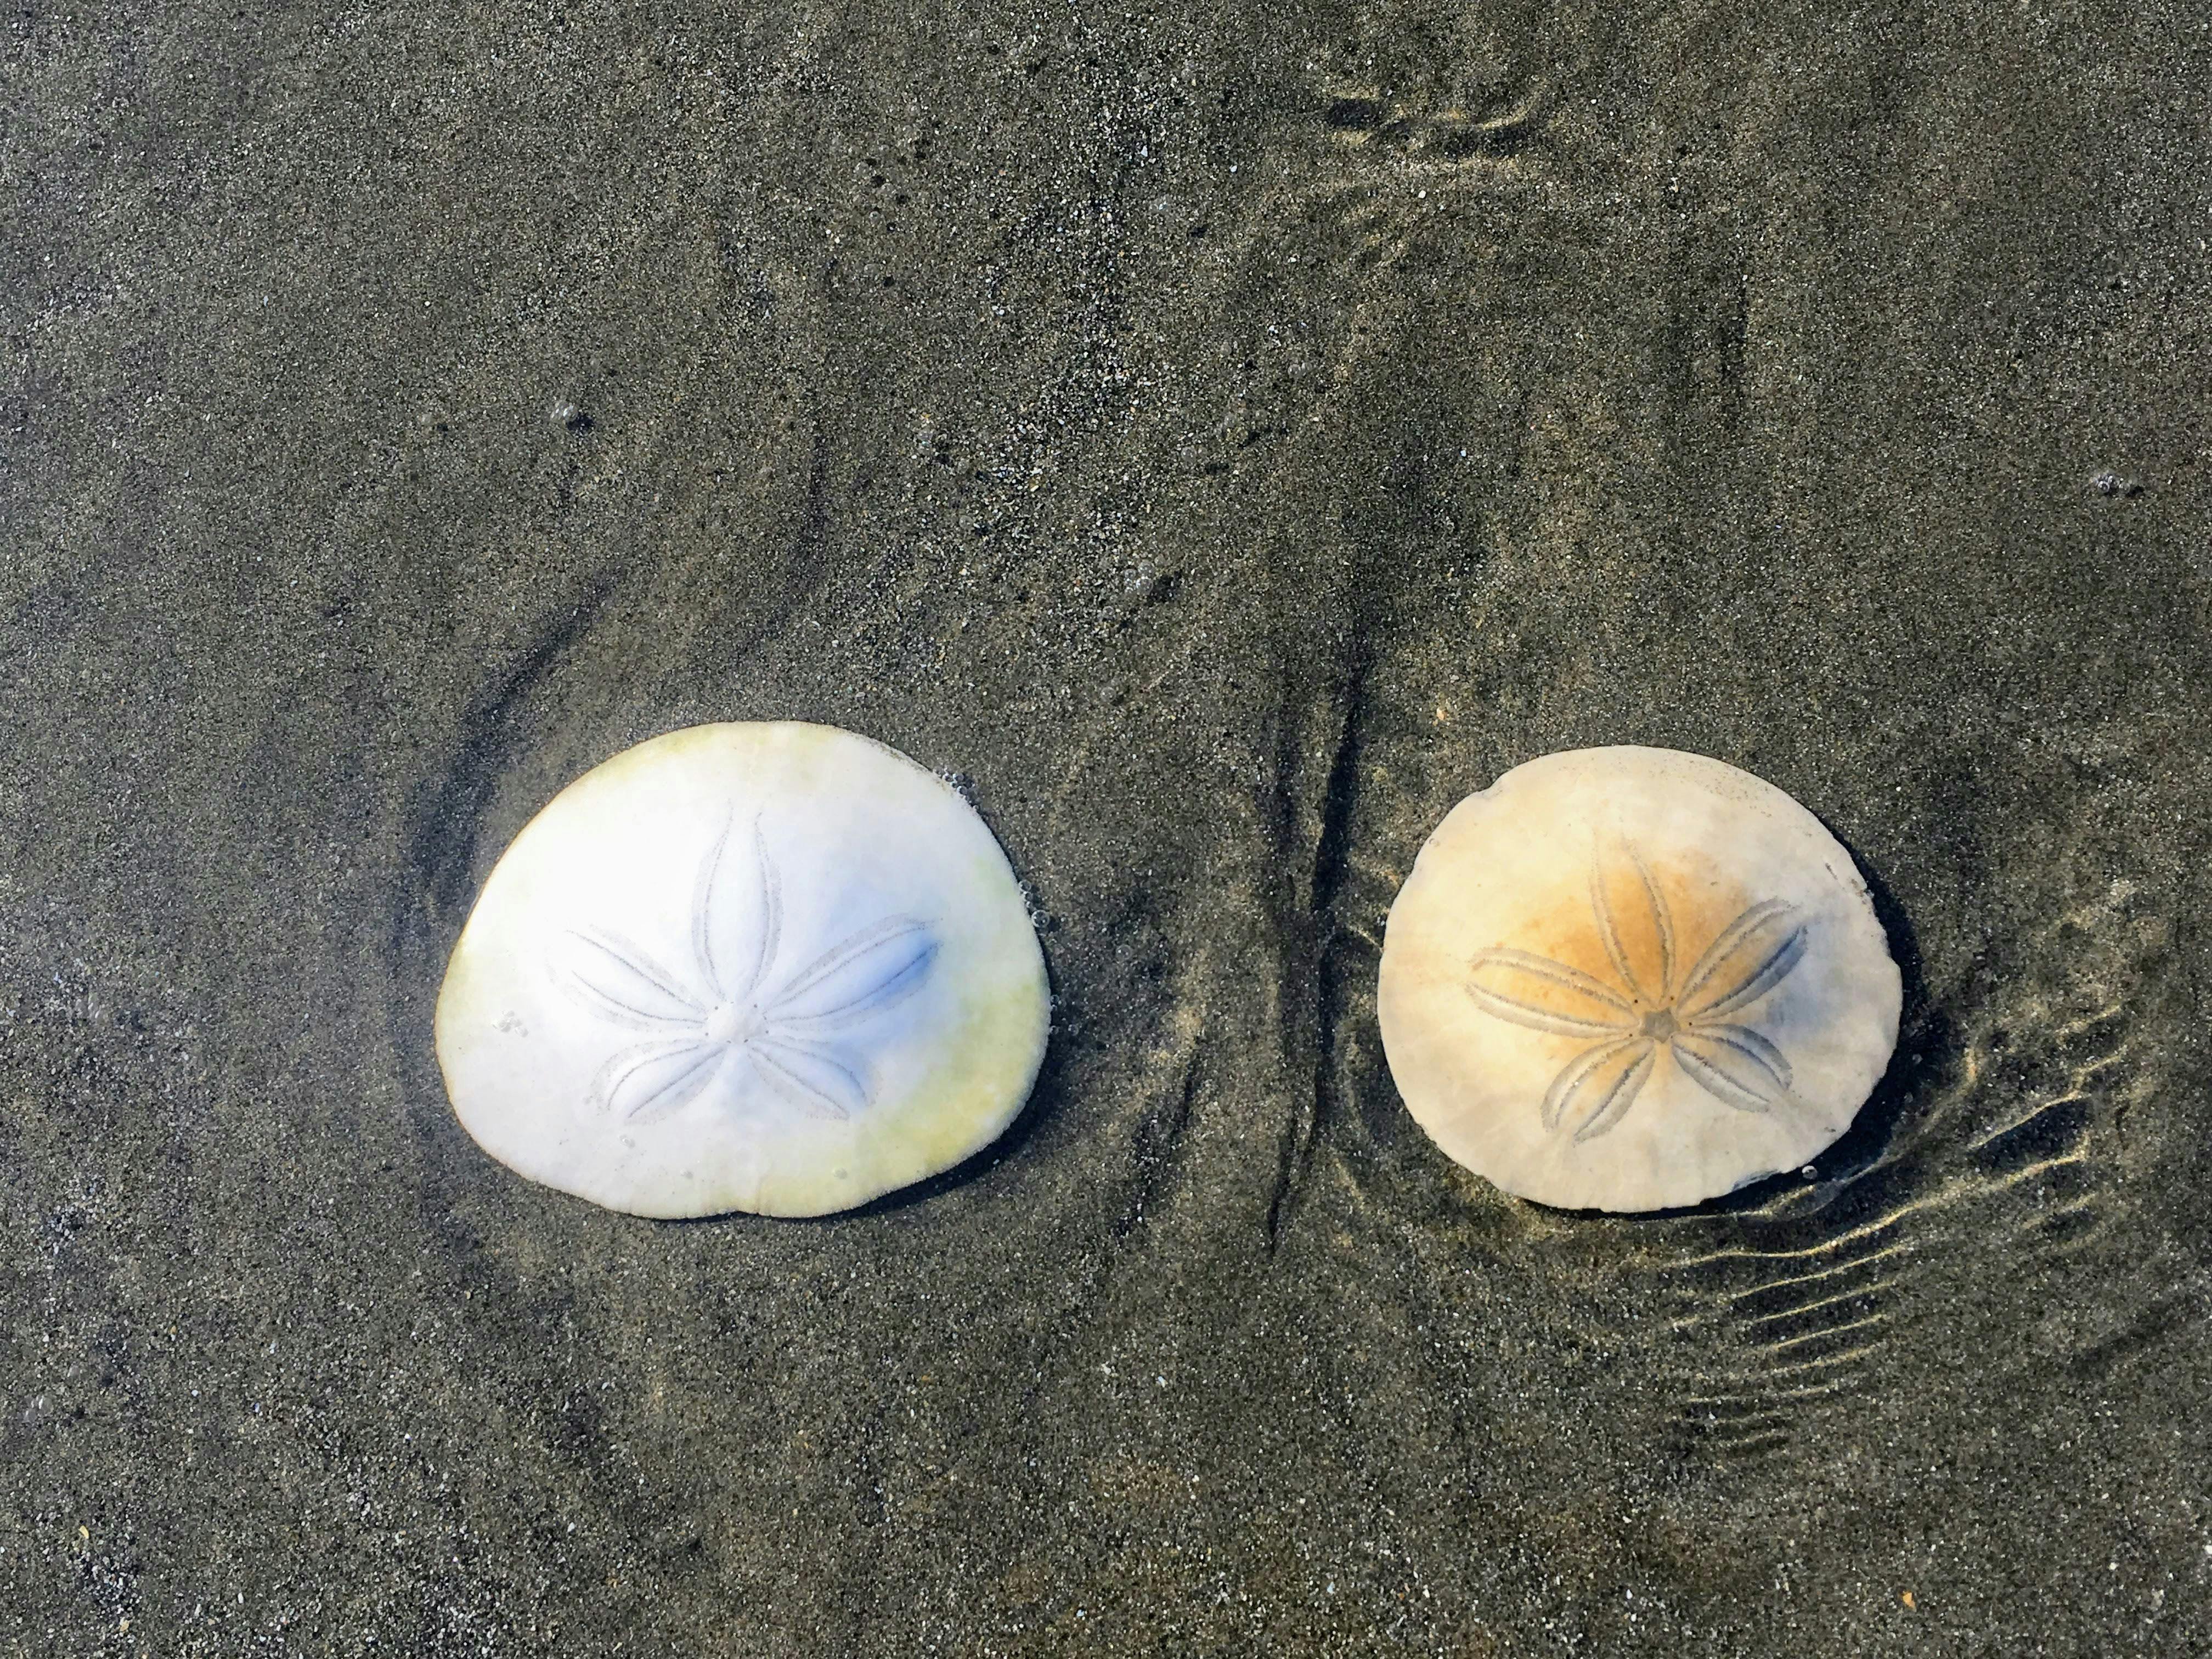 Two sand dollars sit on the sand next to each other